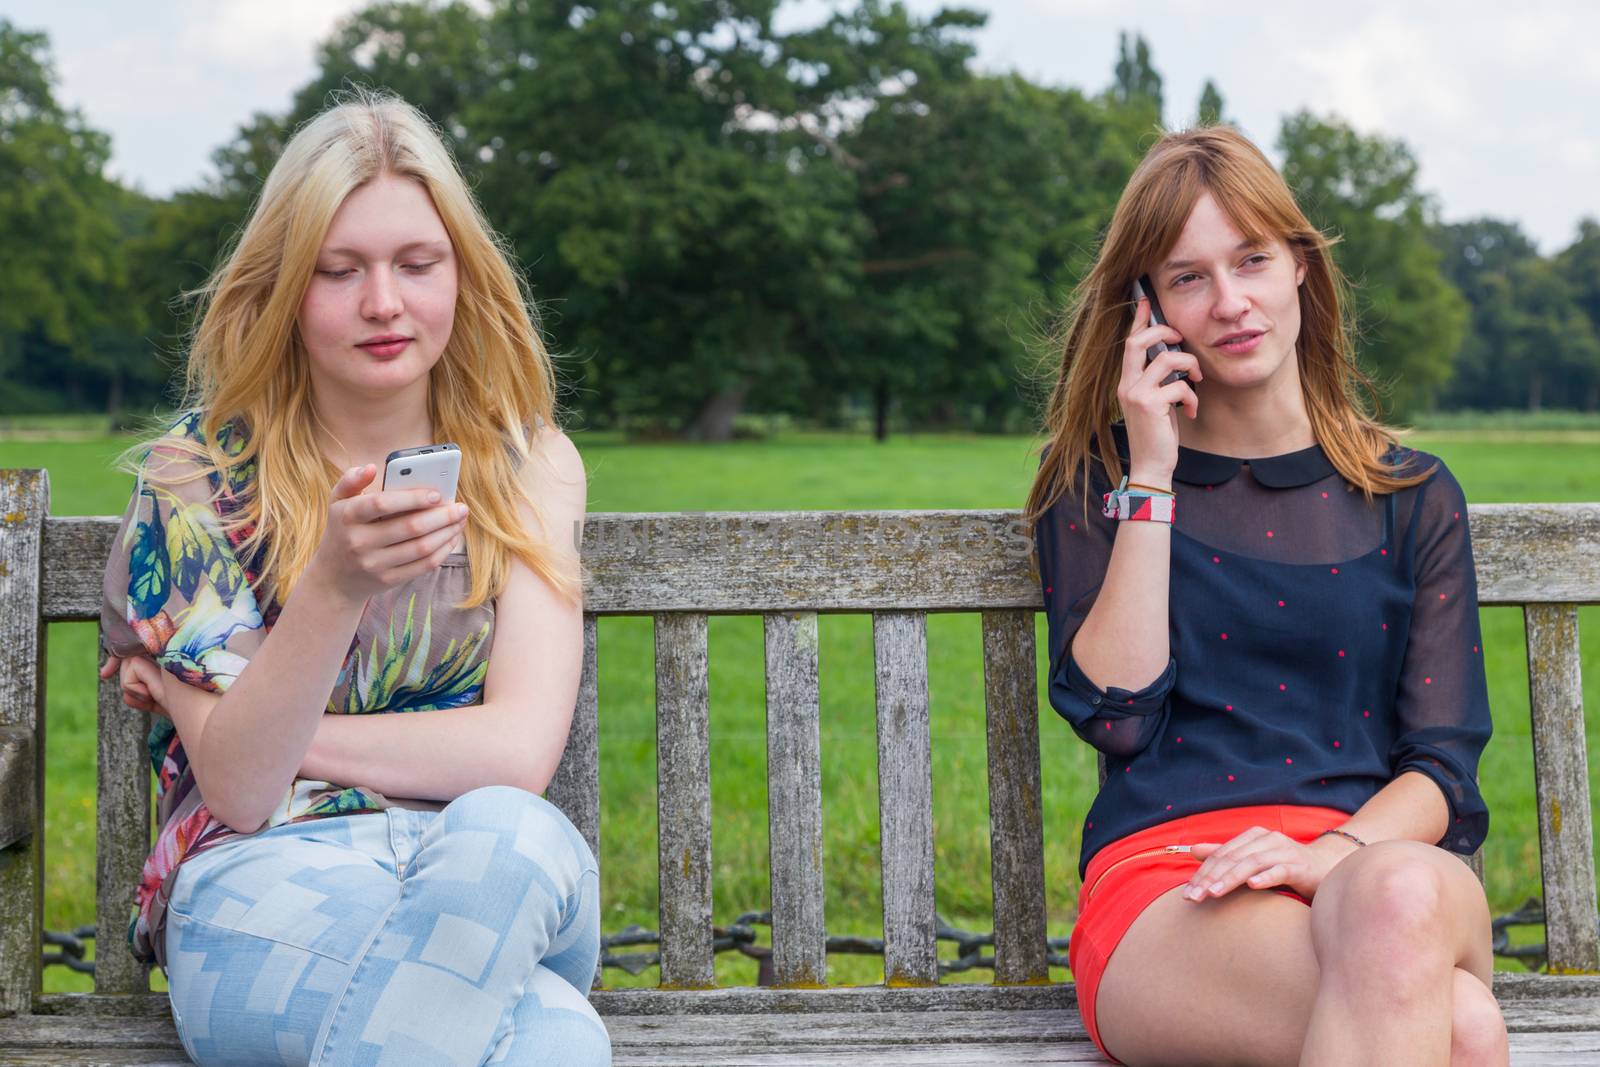 Two caucasian teenage girlfriends sitting on wooden bench in park calling with mobile phone